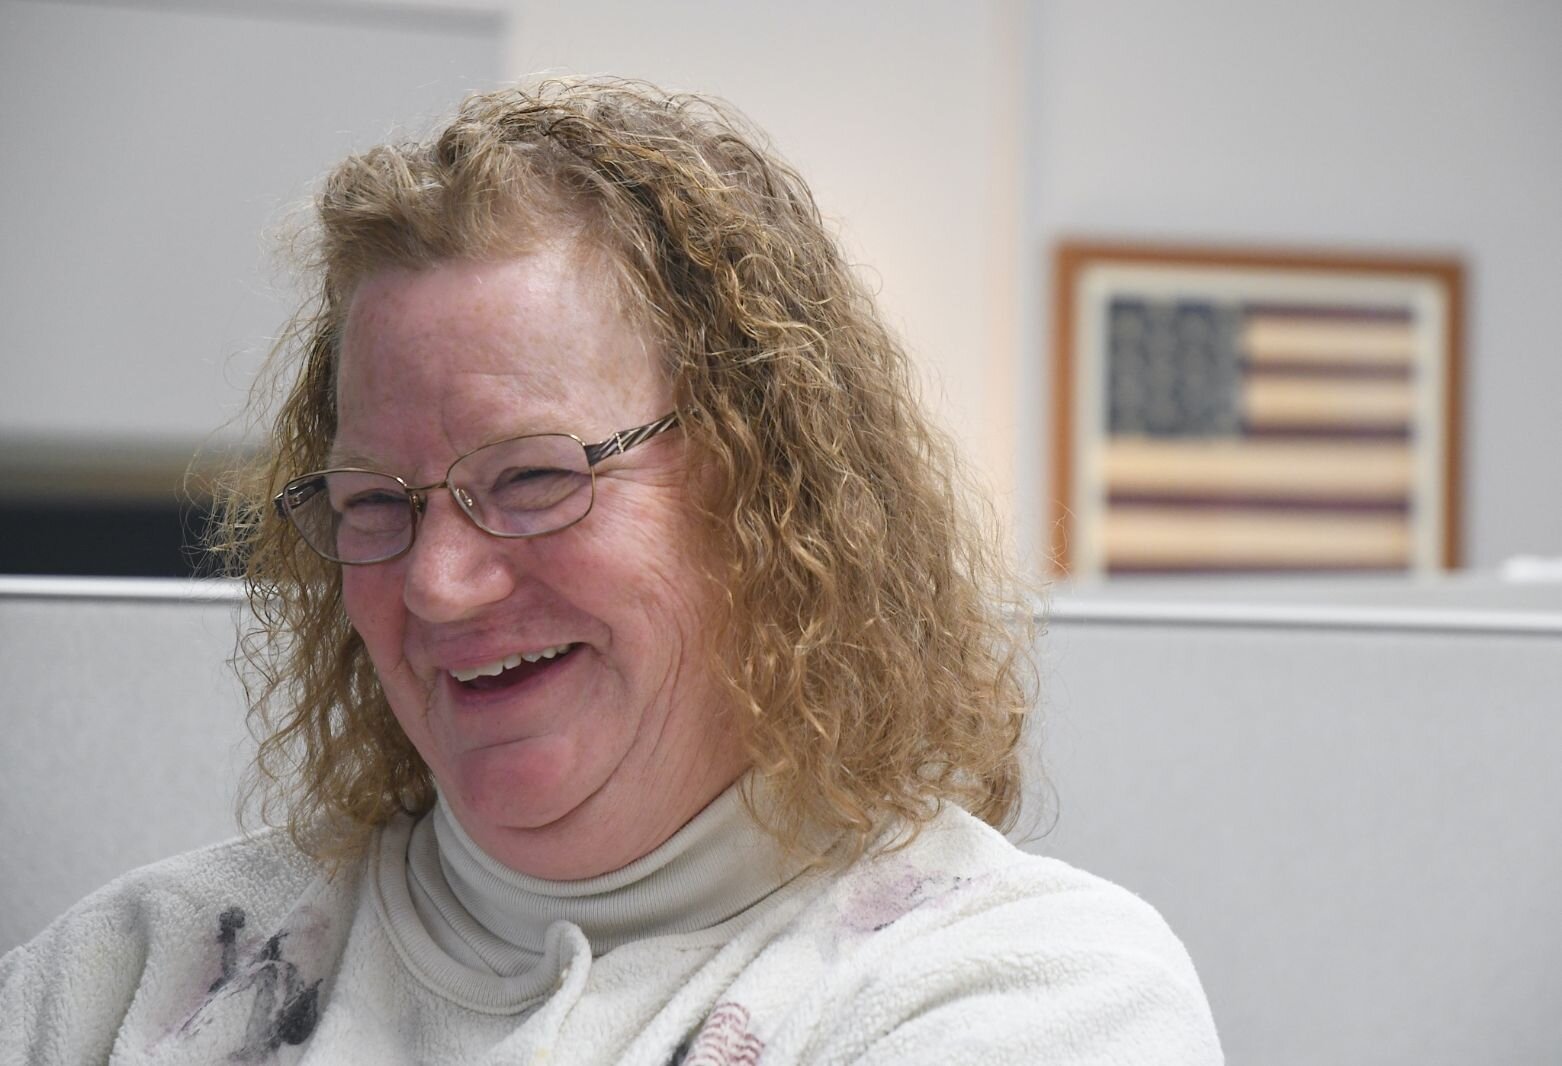 Teri Loew reflects on her 30-year career as Chief Deputy Clerk of Elections for Calhoun County.